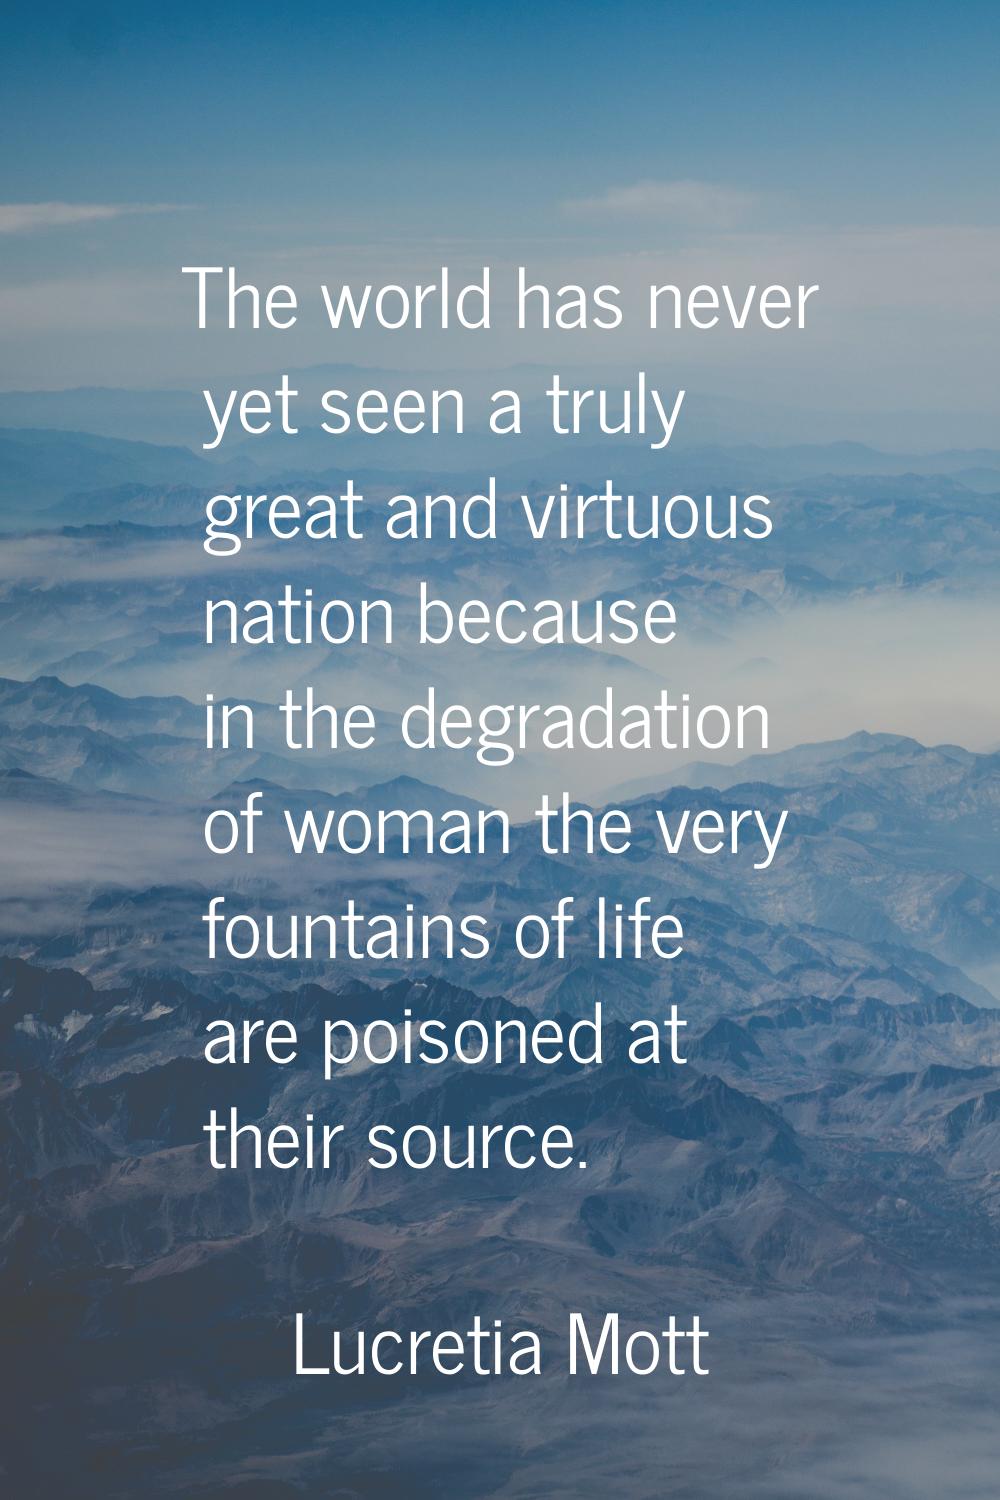 The world has never yet seen a truly great and virtuous nation because in the degradation of woman 